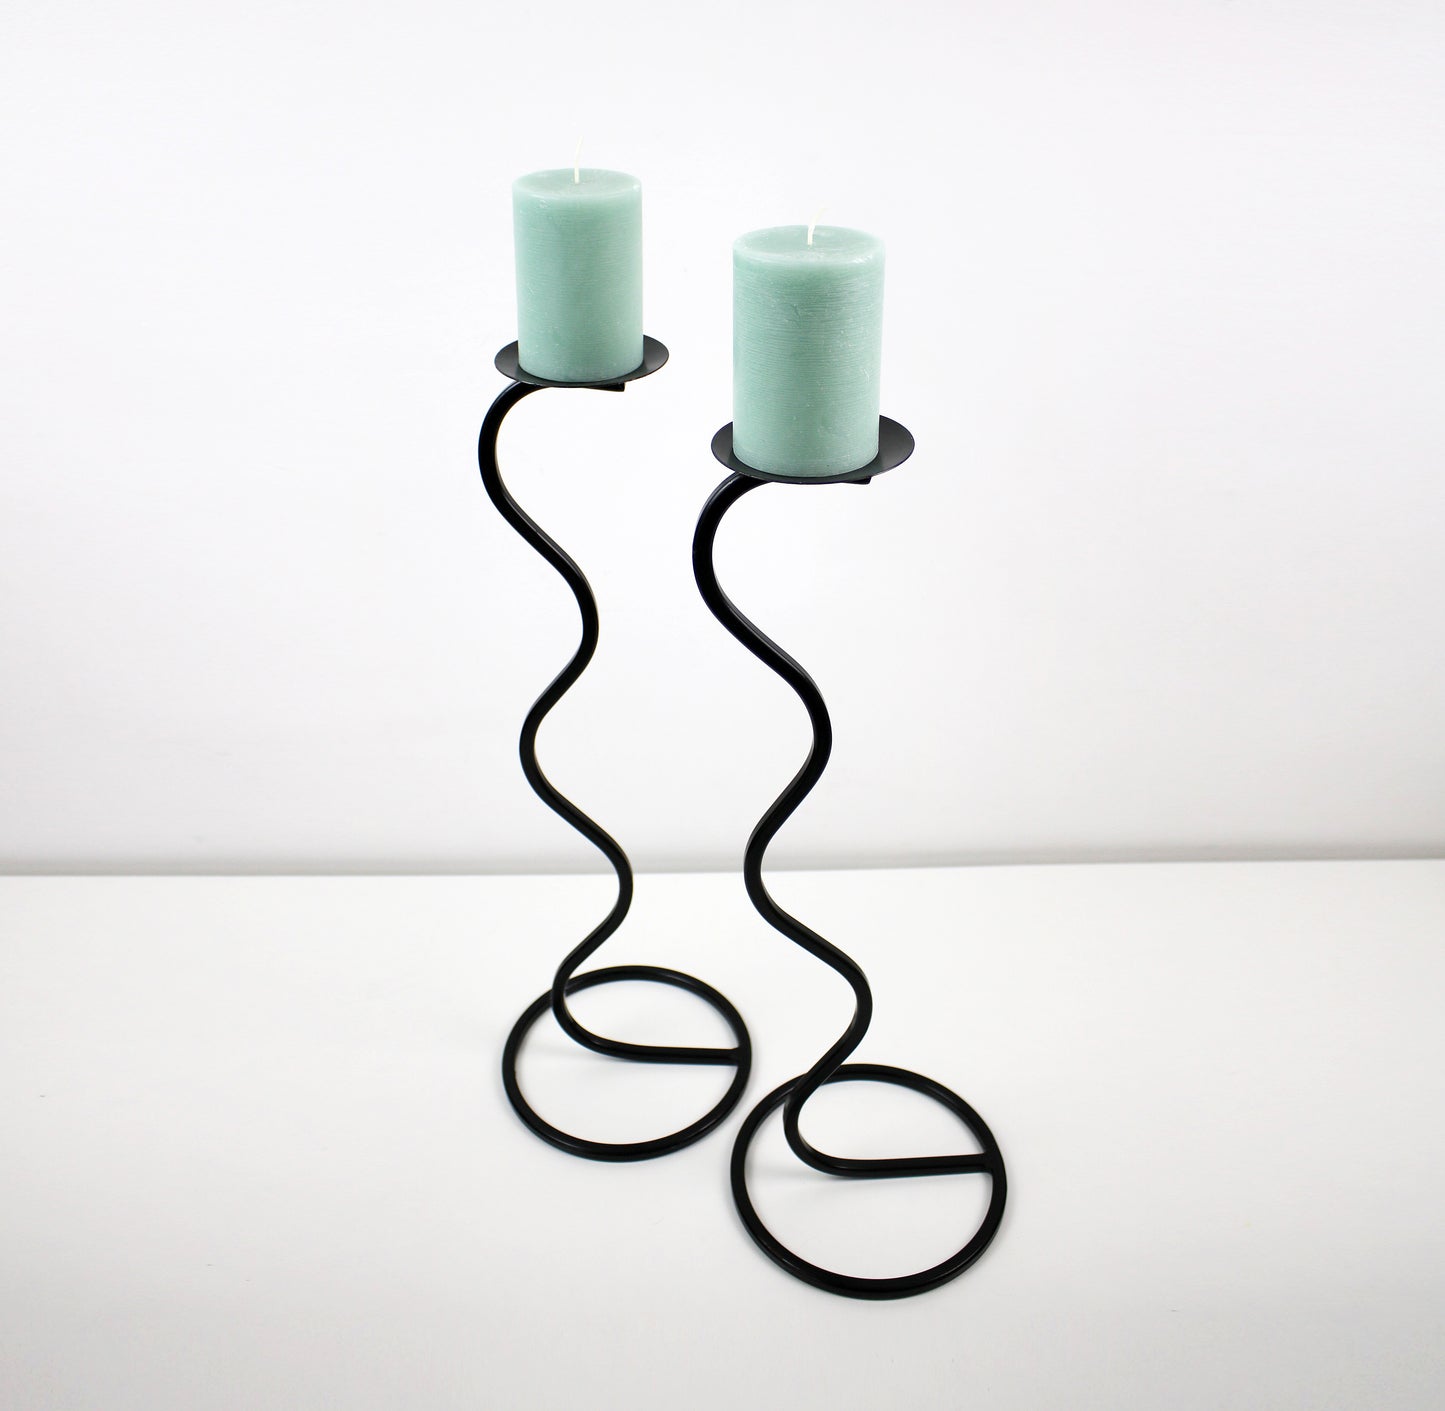 Pair of post modern floor standing wave squiggle iron candlesticks